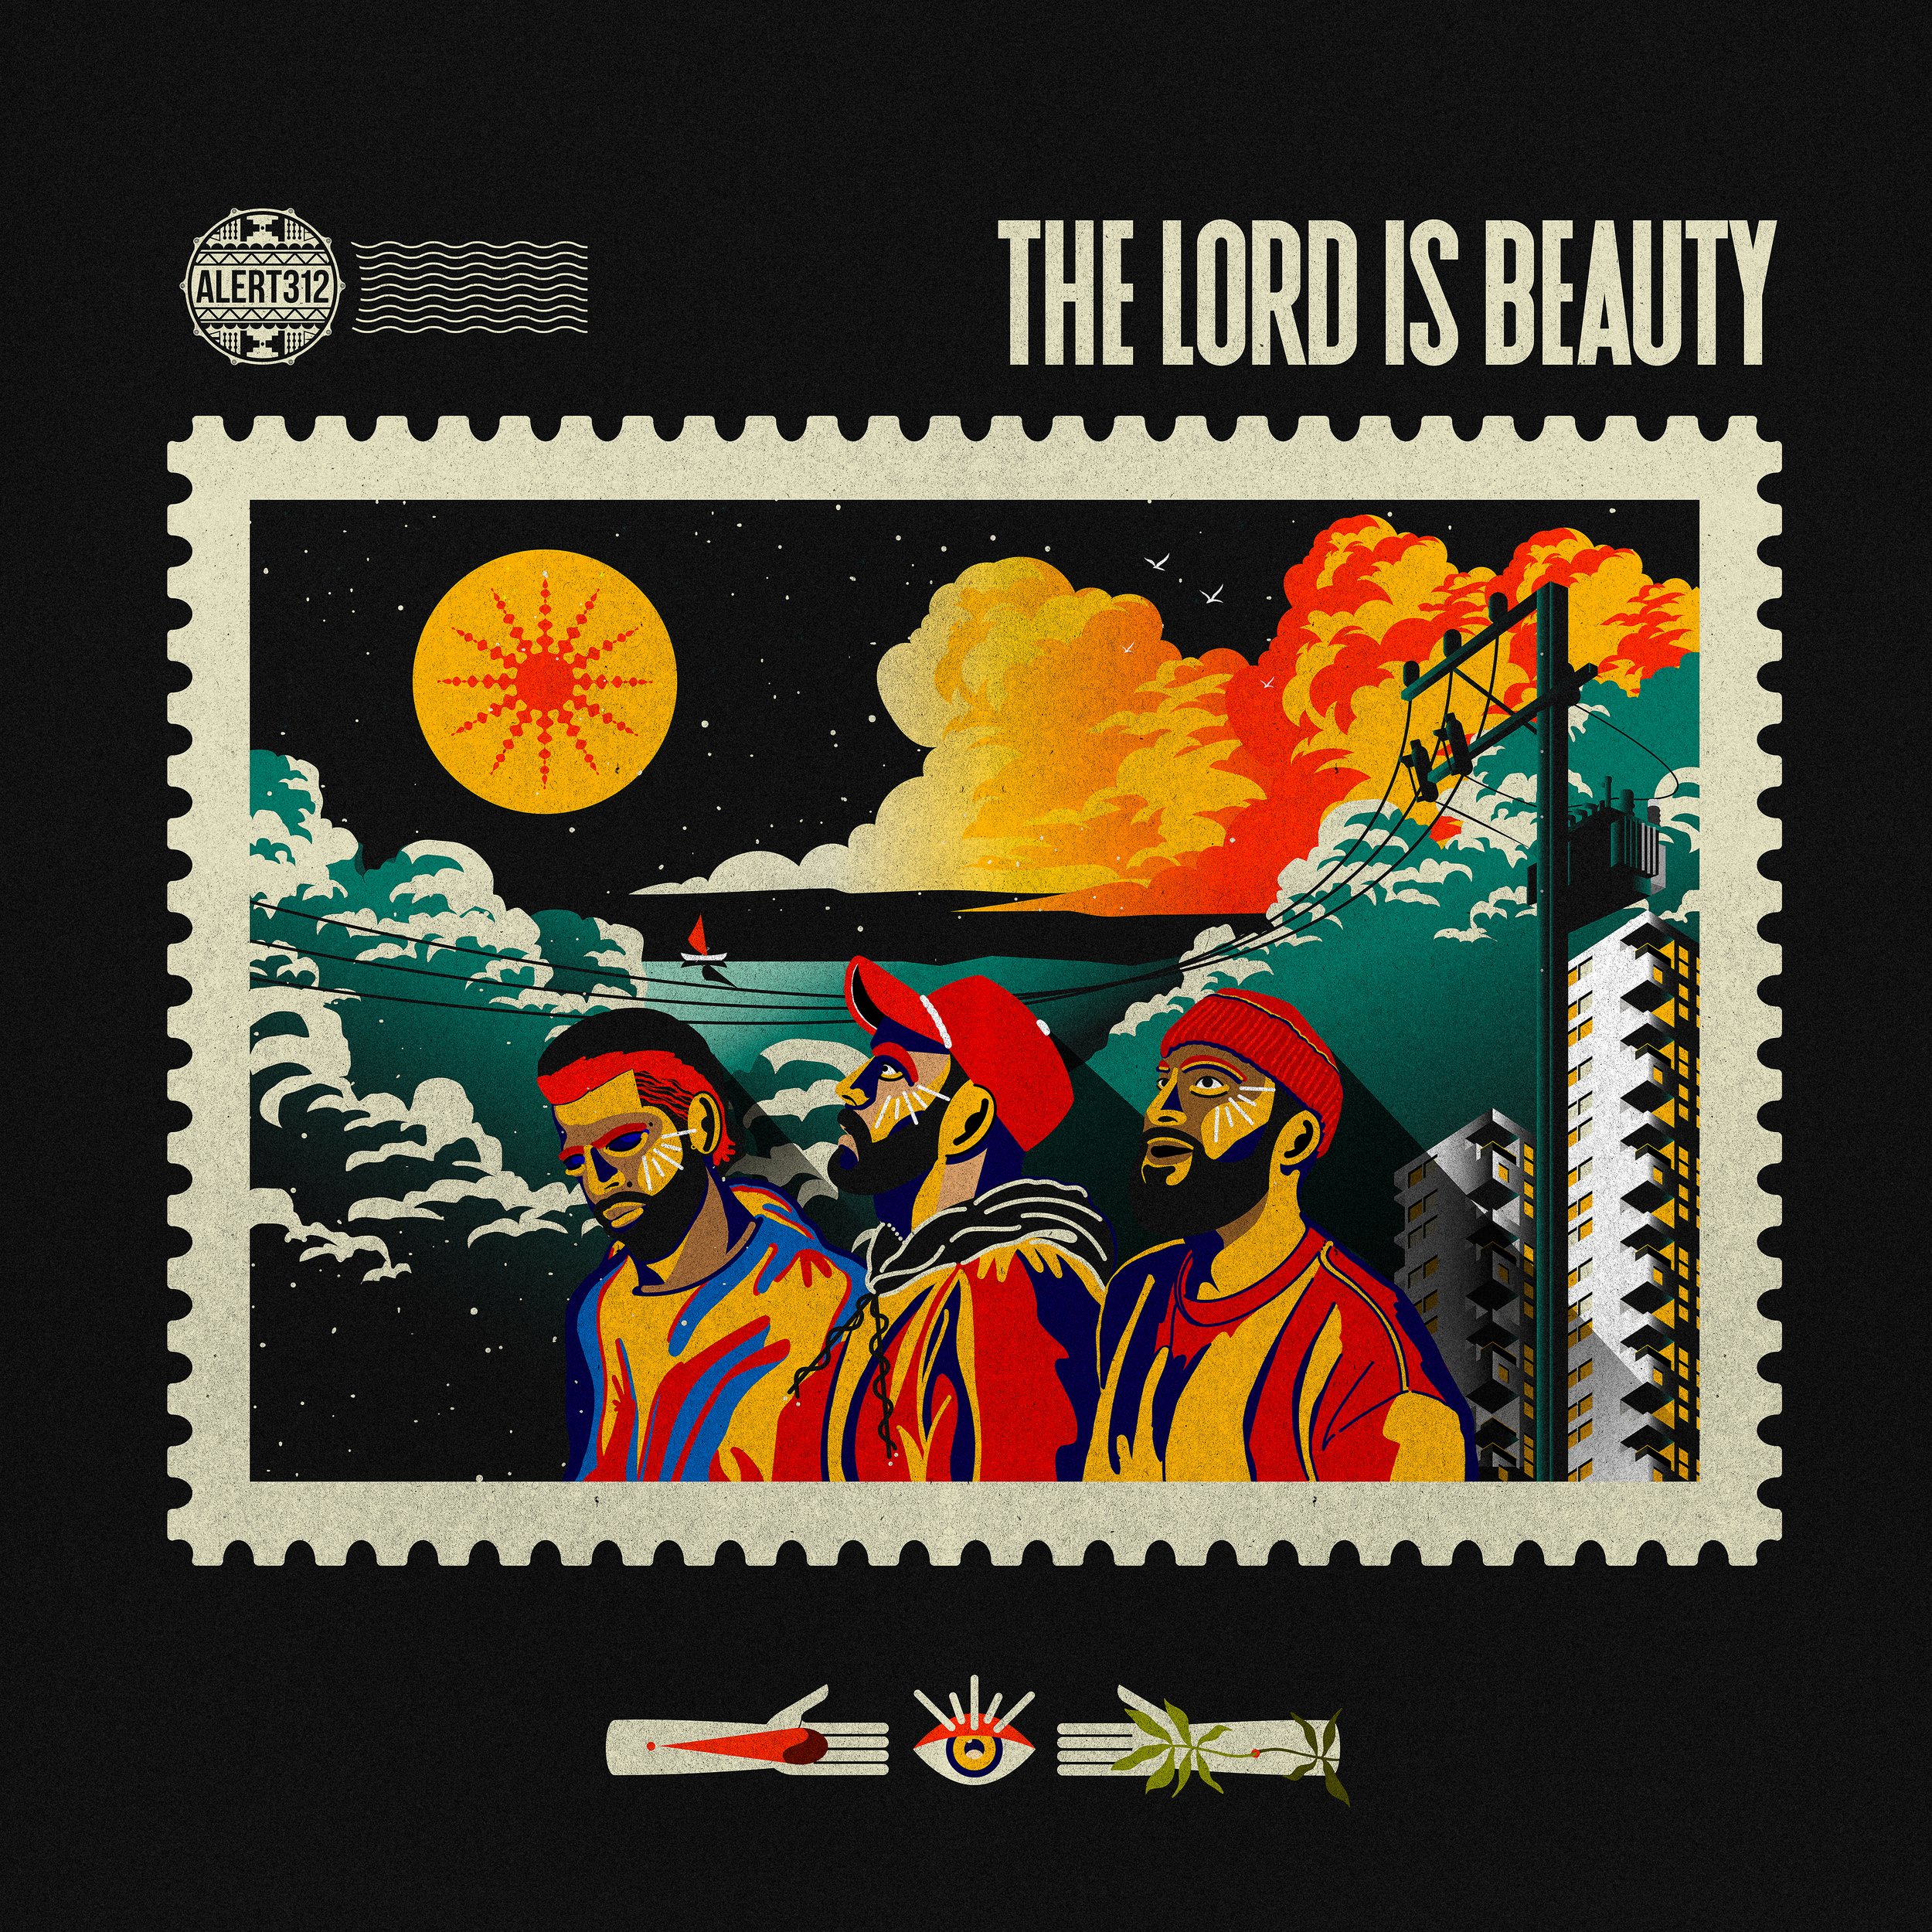 Alert312_The Lord is Beauty LP Cover.jpg